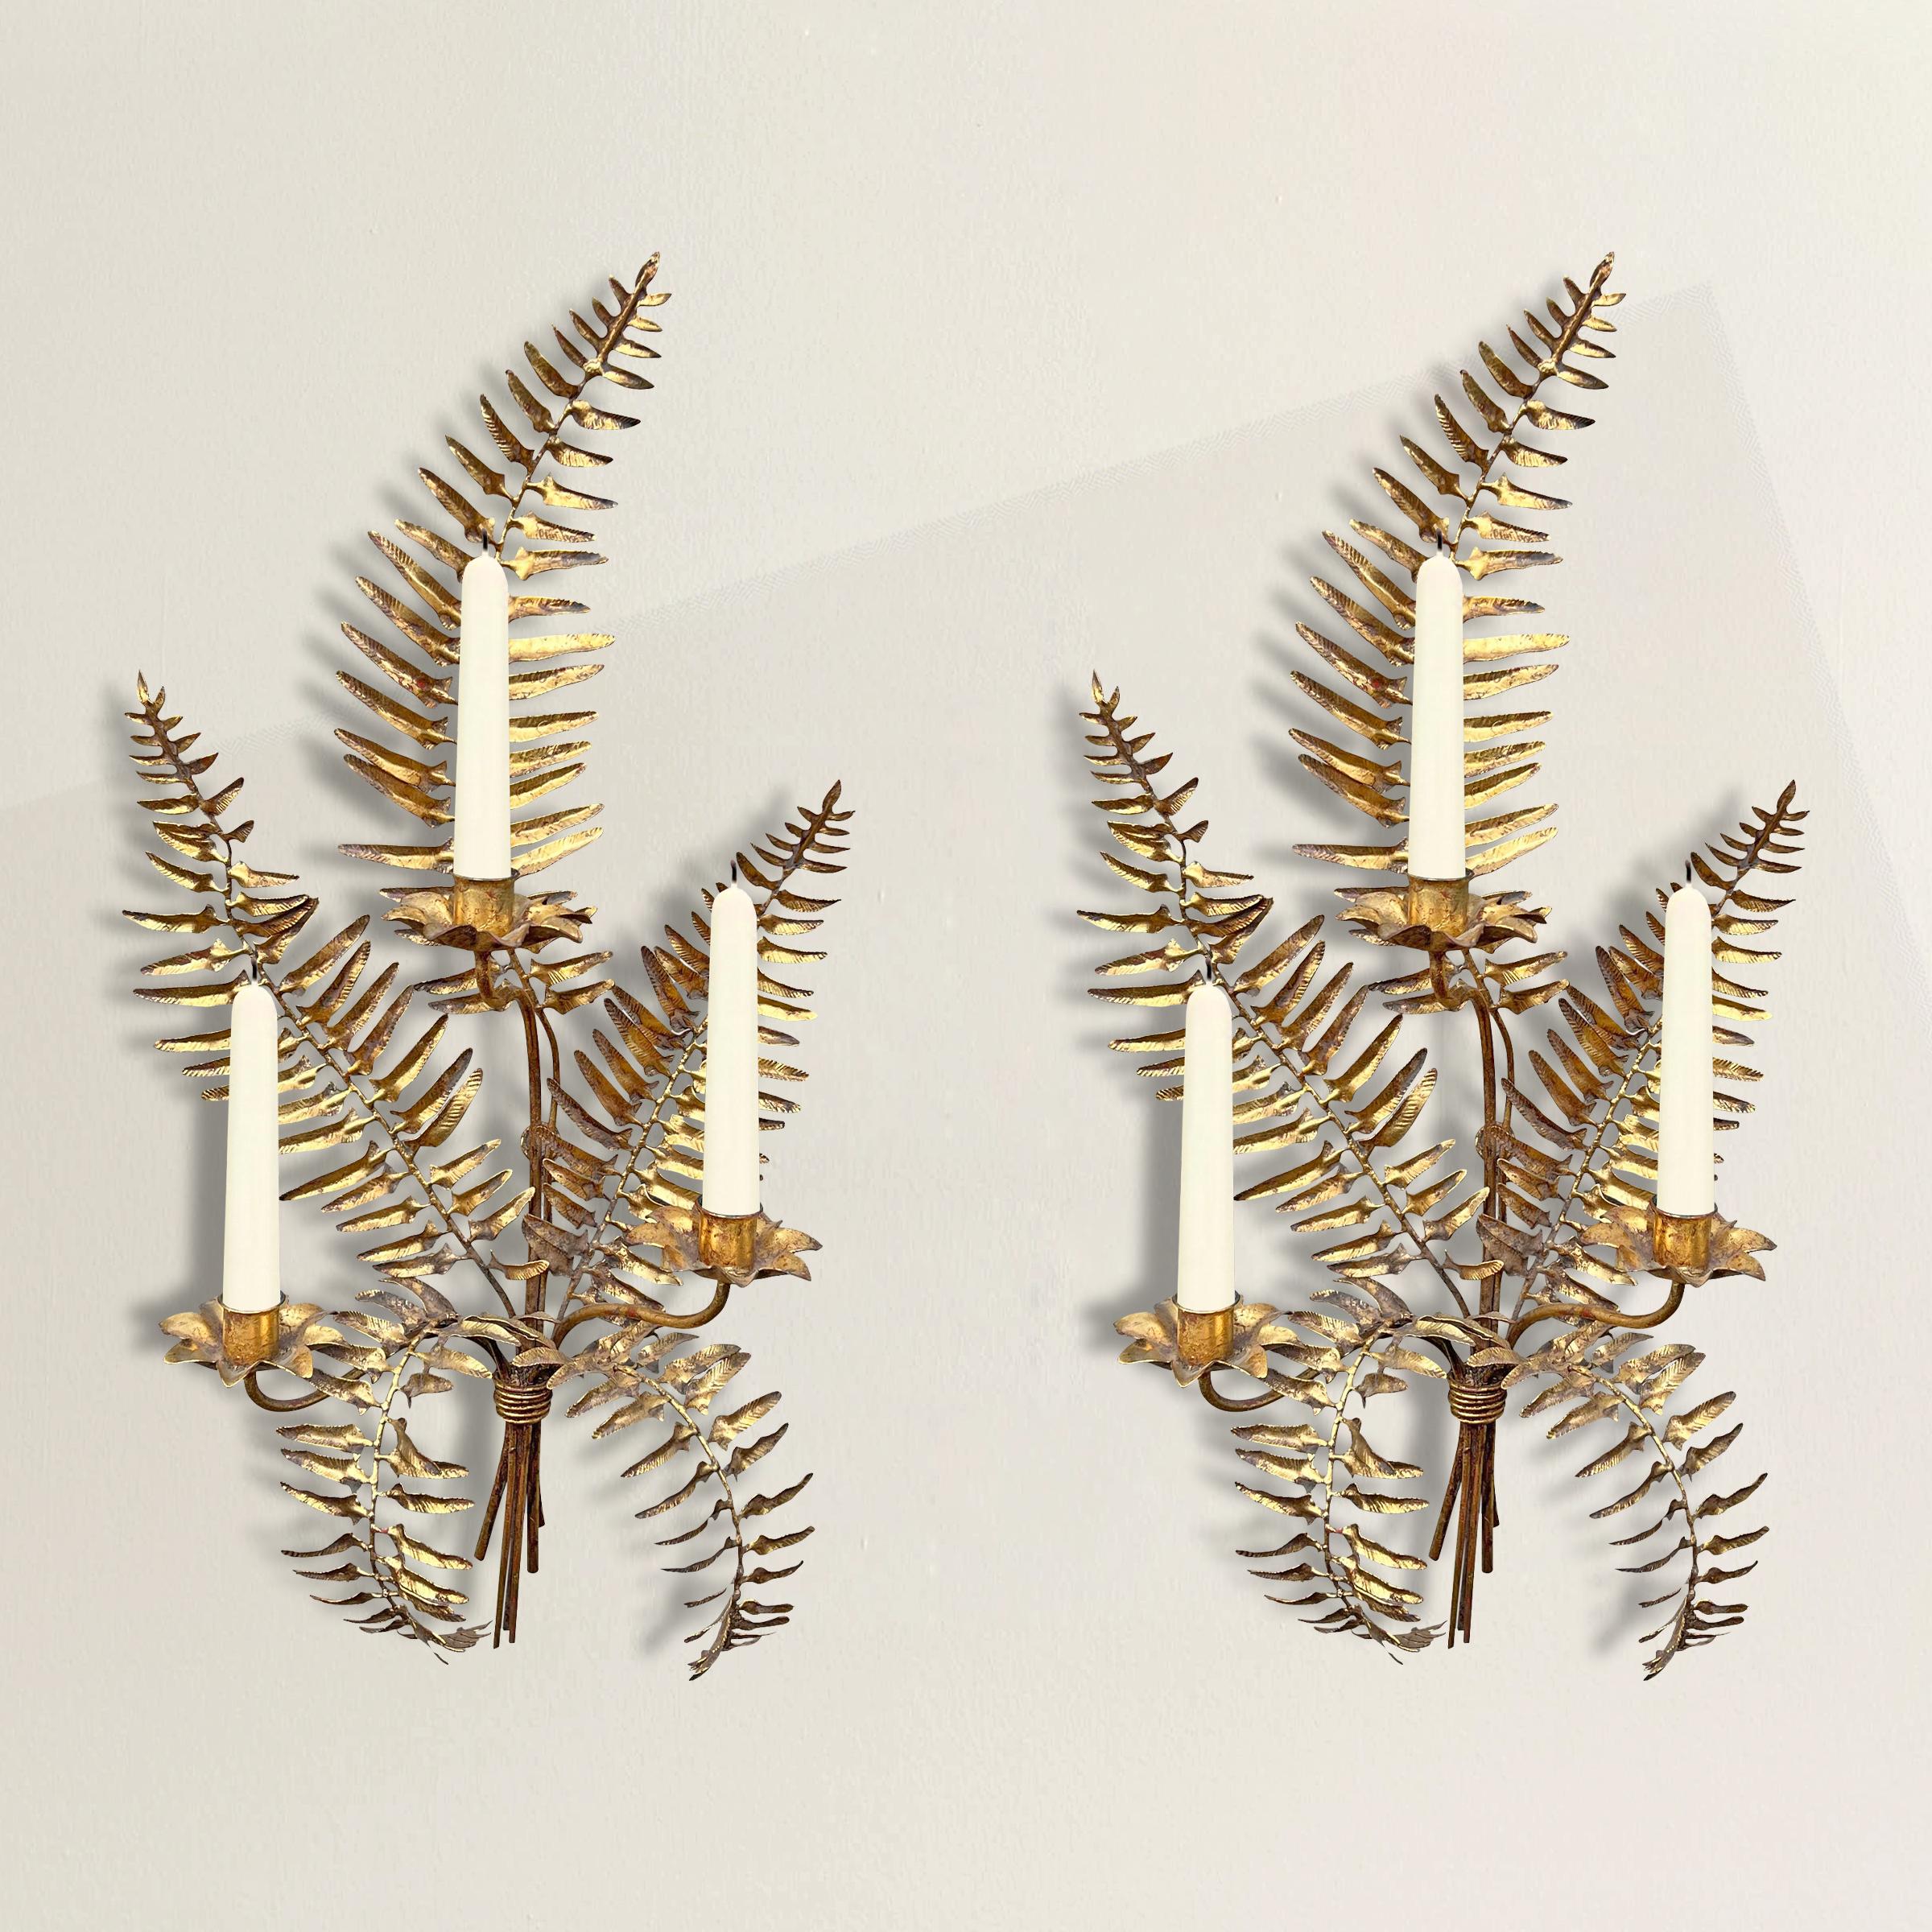 A whimsical yet chic pair of vintage Italian gilt fern candle sconces with a cluster of fern fronds tied at the bottom with string, and three arms with ruffled candle cups. Perfect flanking a mirror in your dining room, or have them electrified and